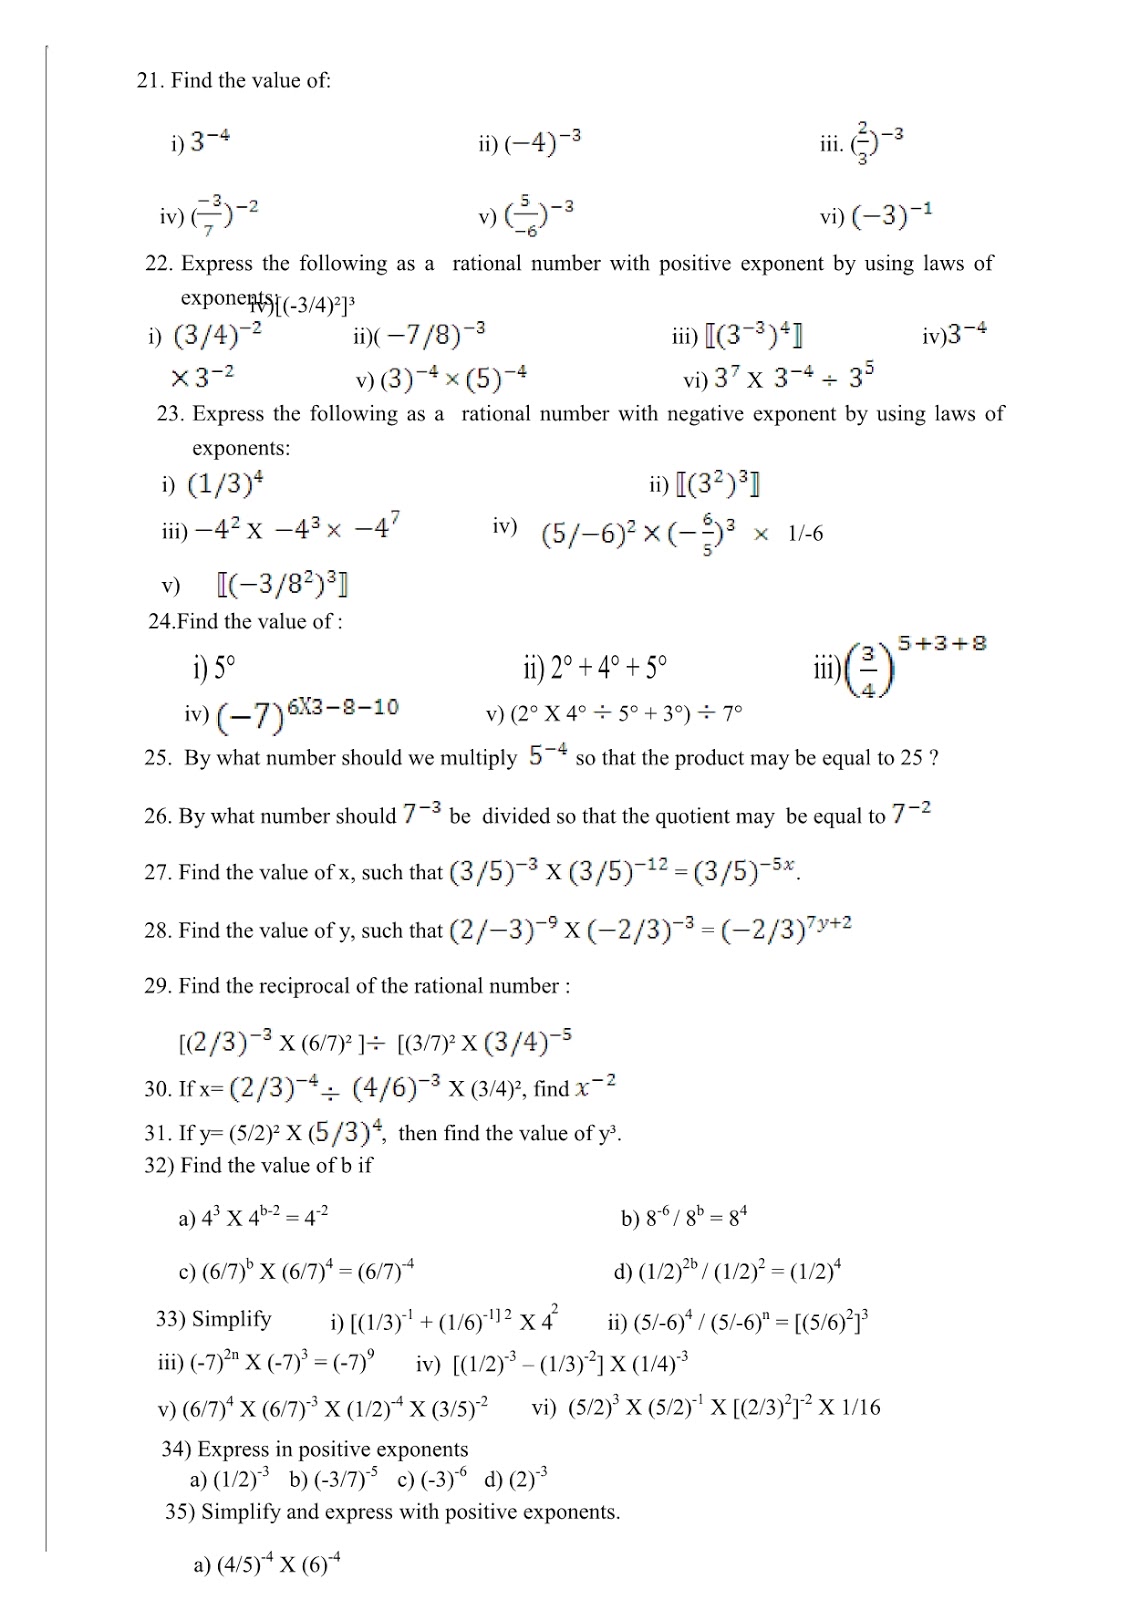 CBSE-MATH: 8th Exponents & Powers Worksheet